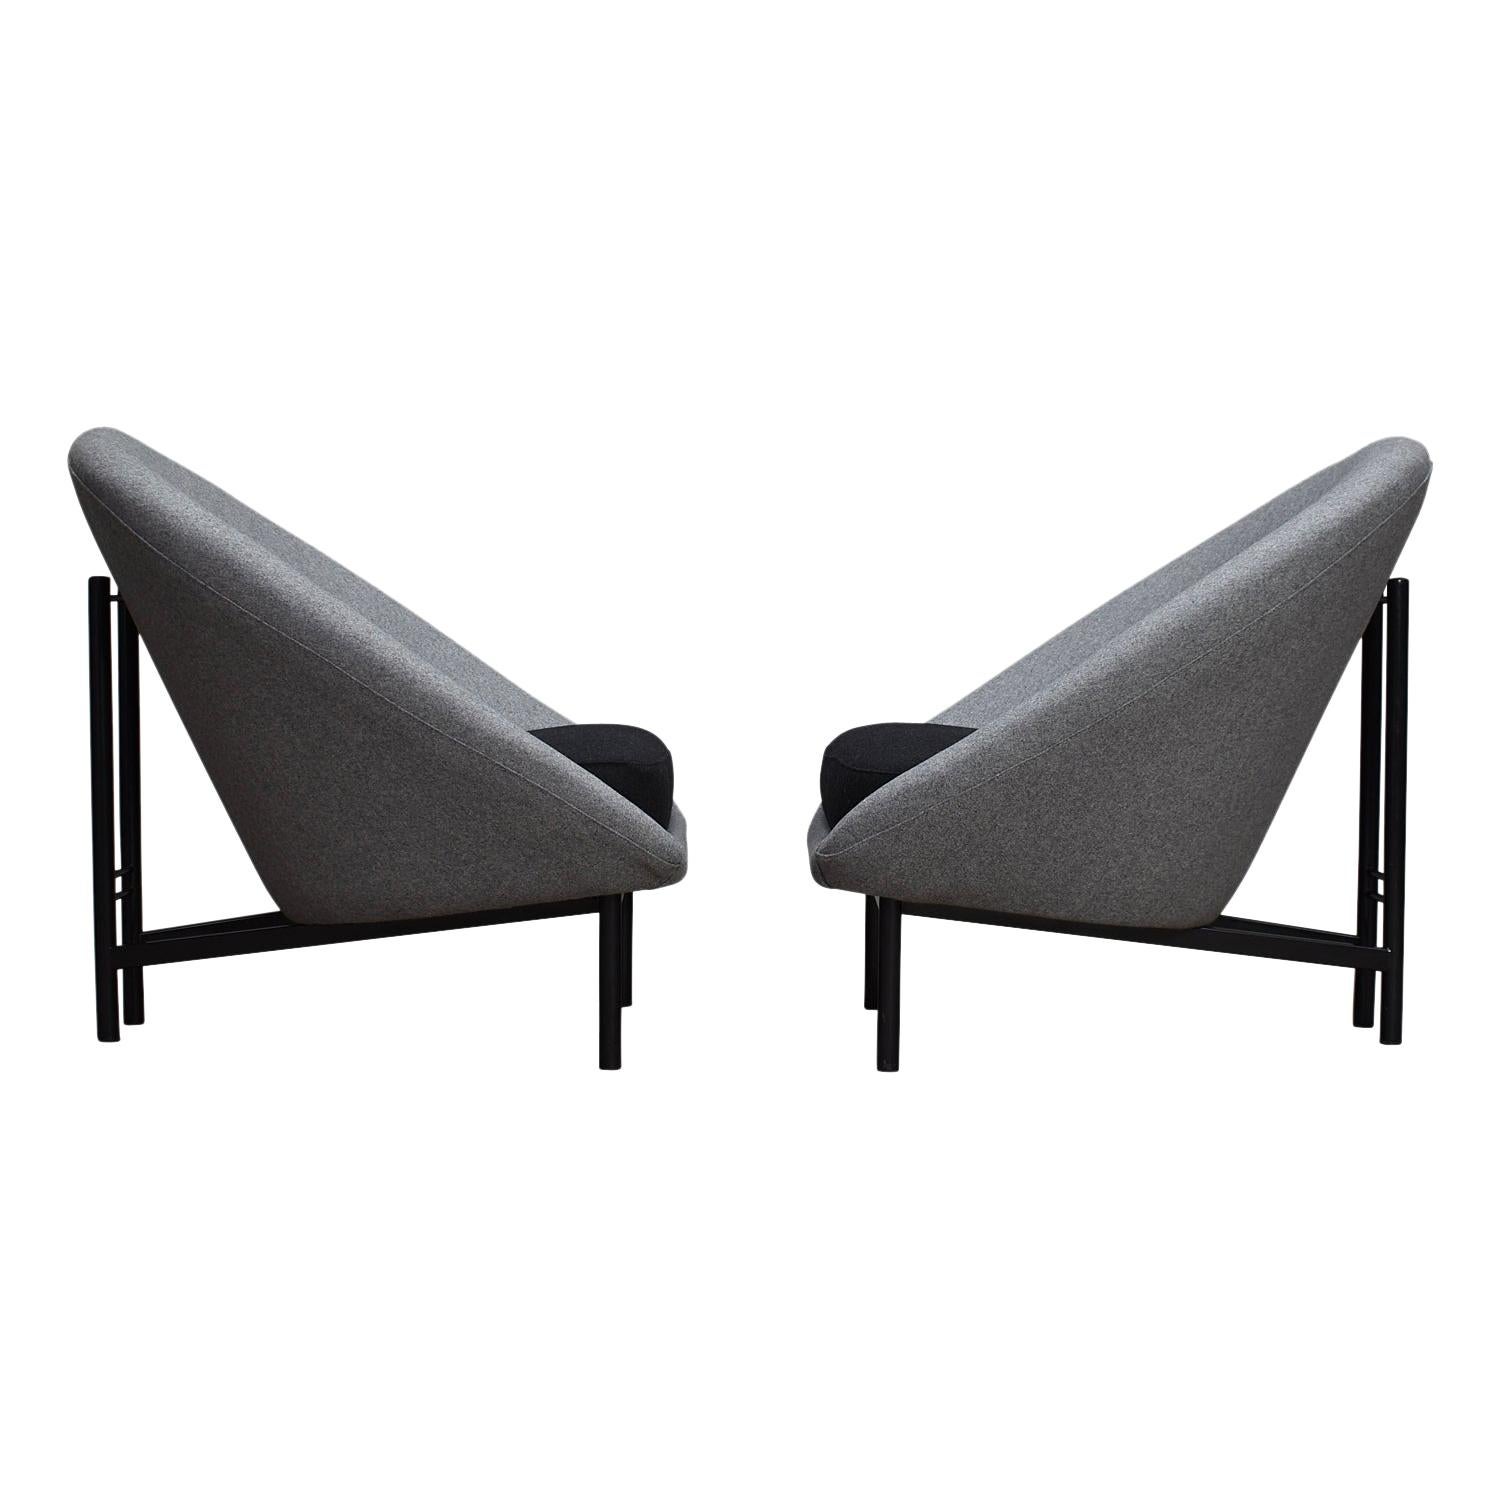 Theo Ruth F115 Armchairs by Artifort, Netherlands, 1958